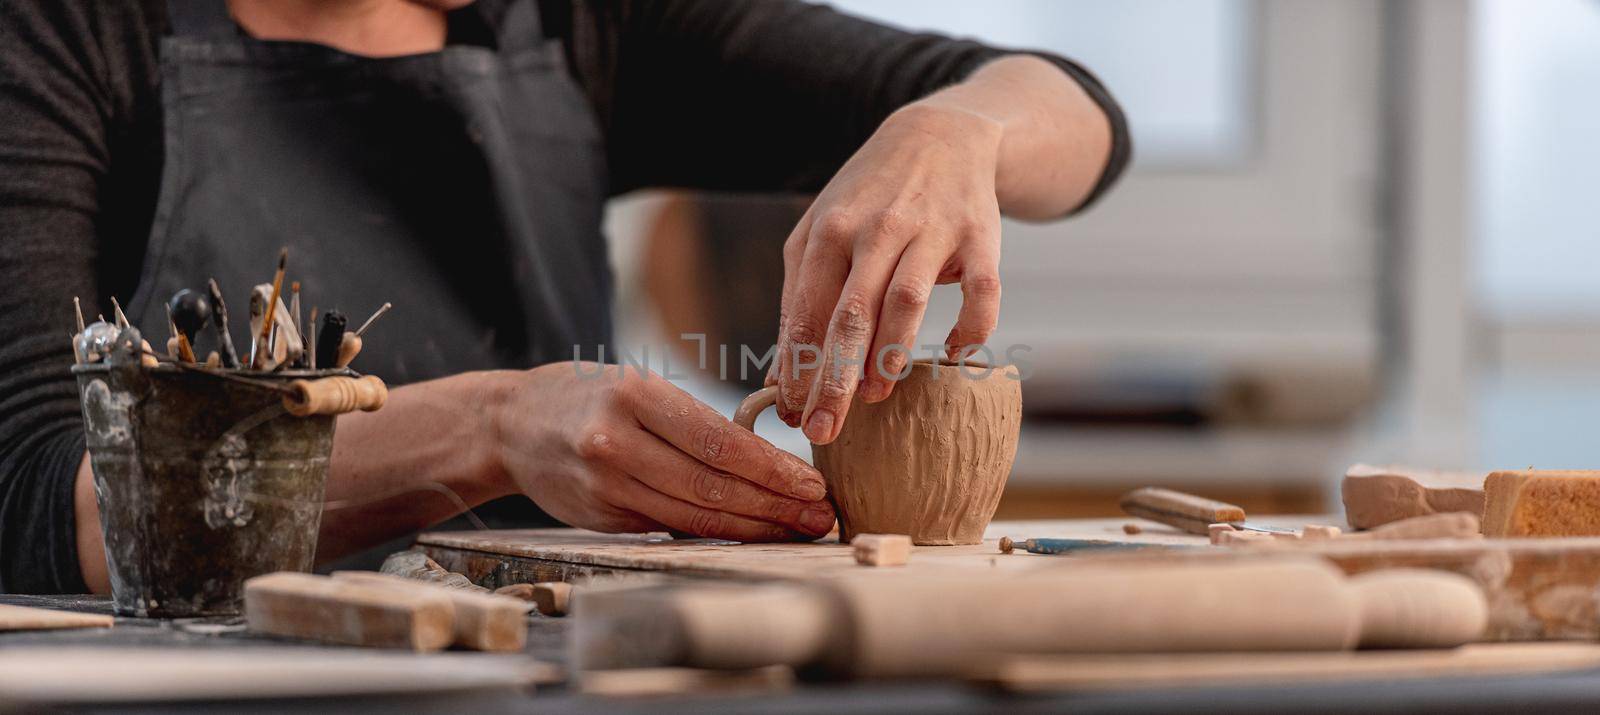 Hands of potter forming cup from clay by tan4ikk1